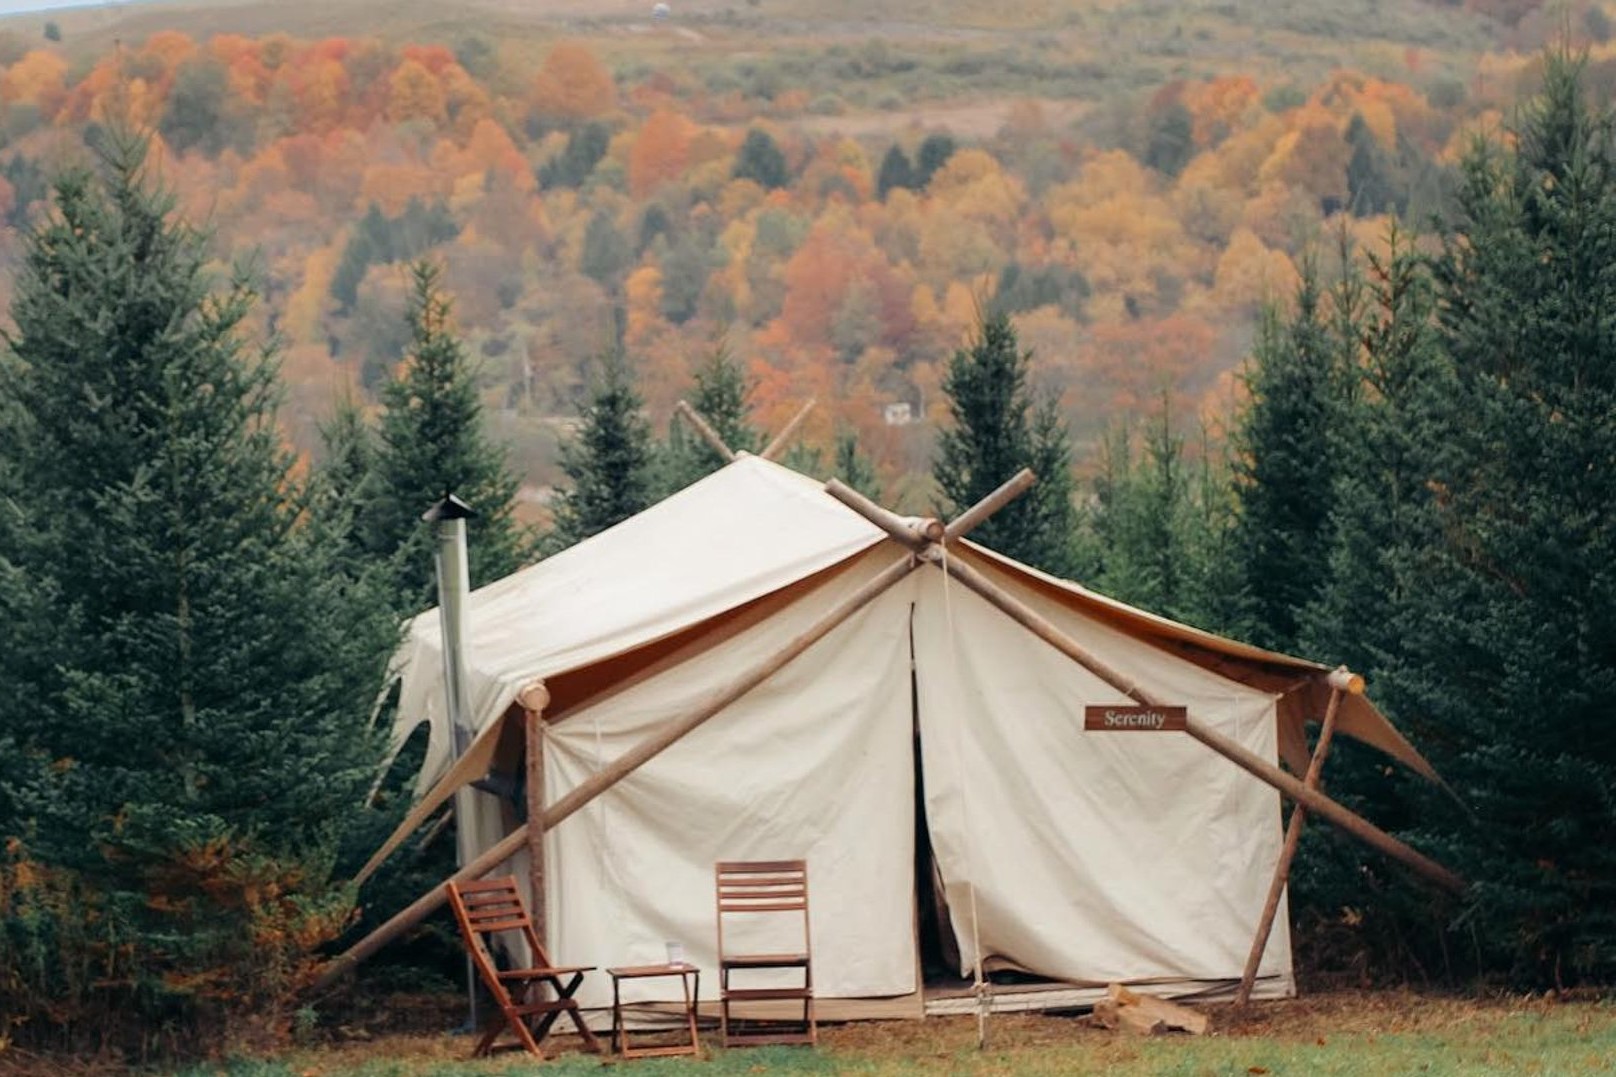 https://www.themanual.com/wp-content/uploads/sites/9/2021/05/hideaway-co-the-best-glamping-experience.jpg?fit=1616%2C1077&p=1